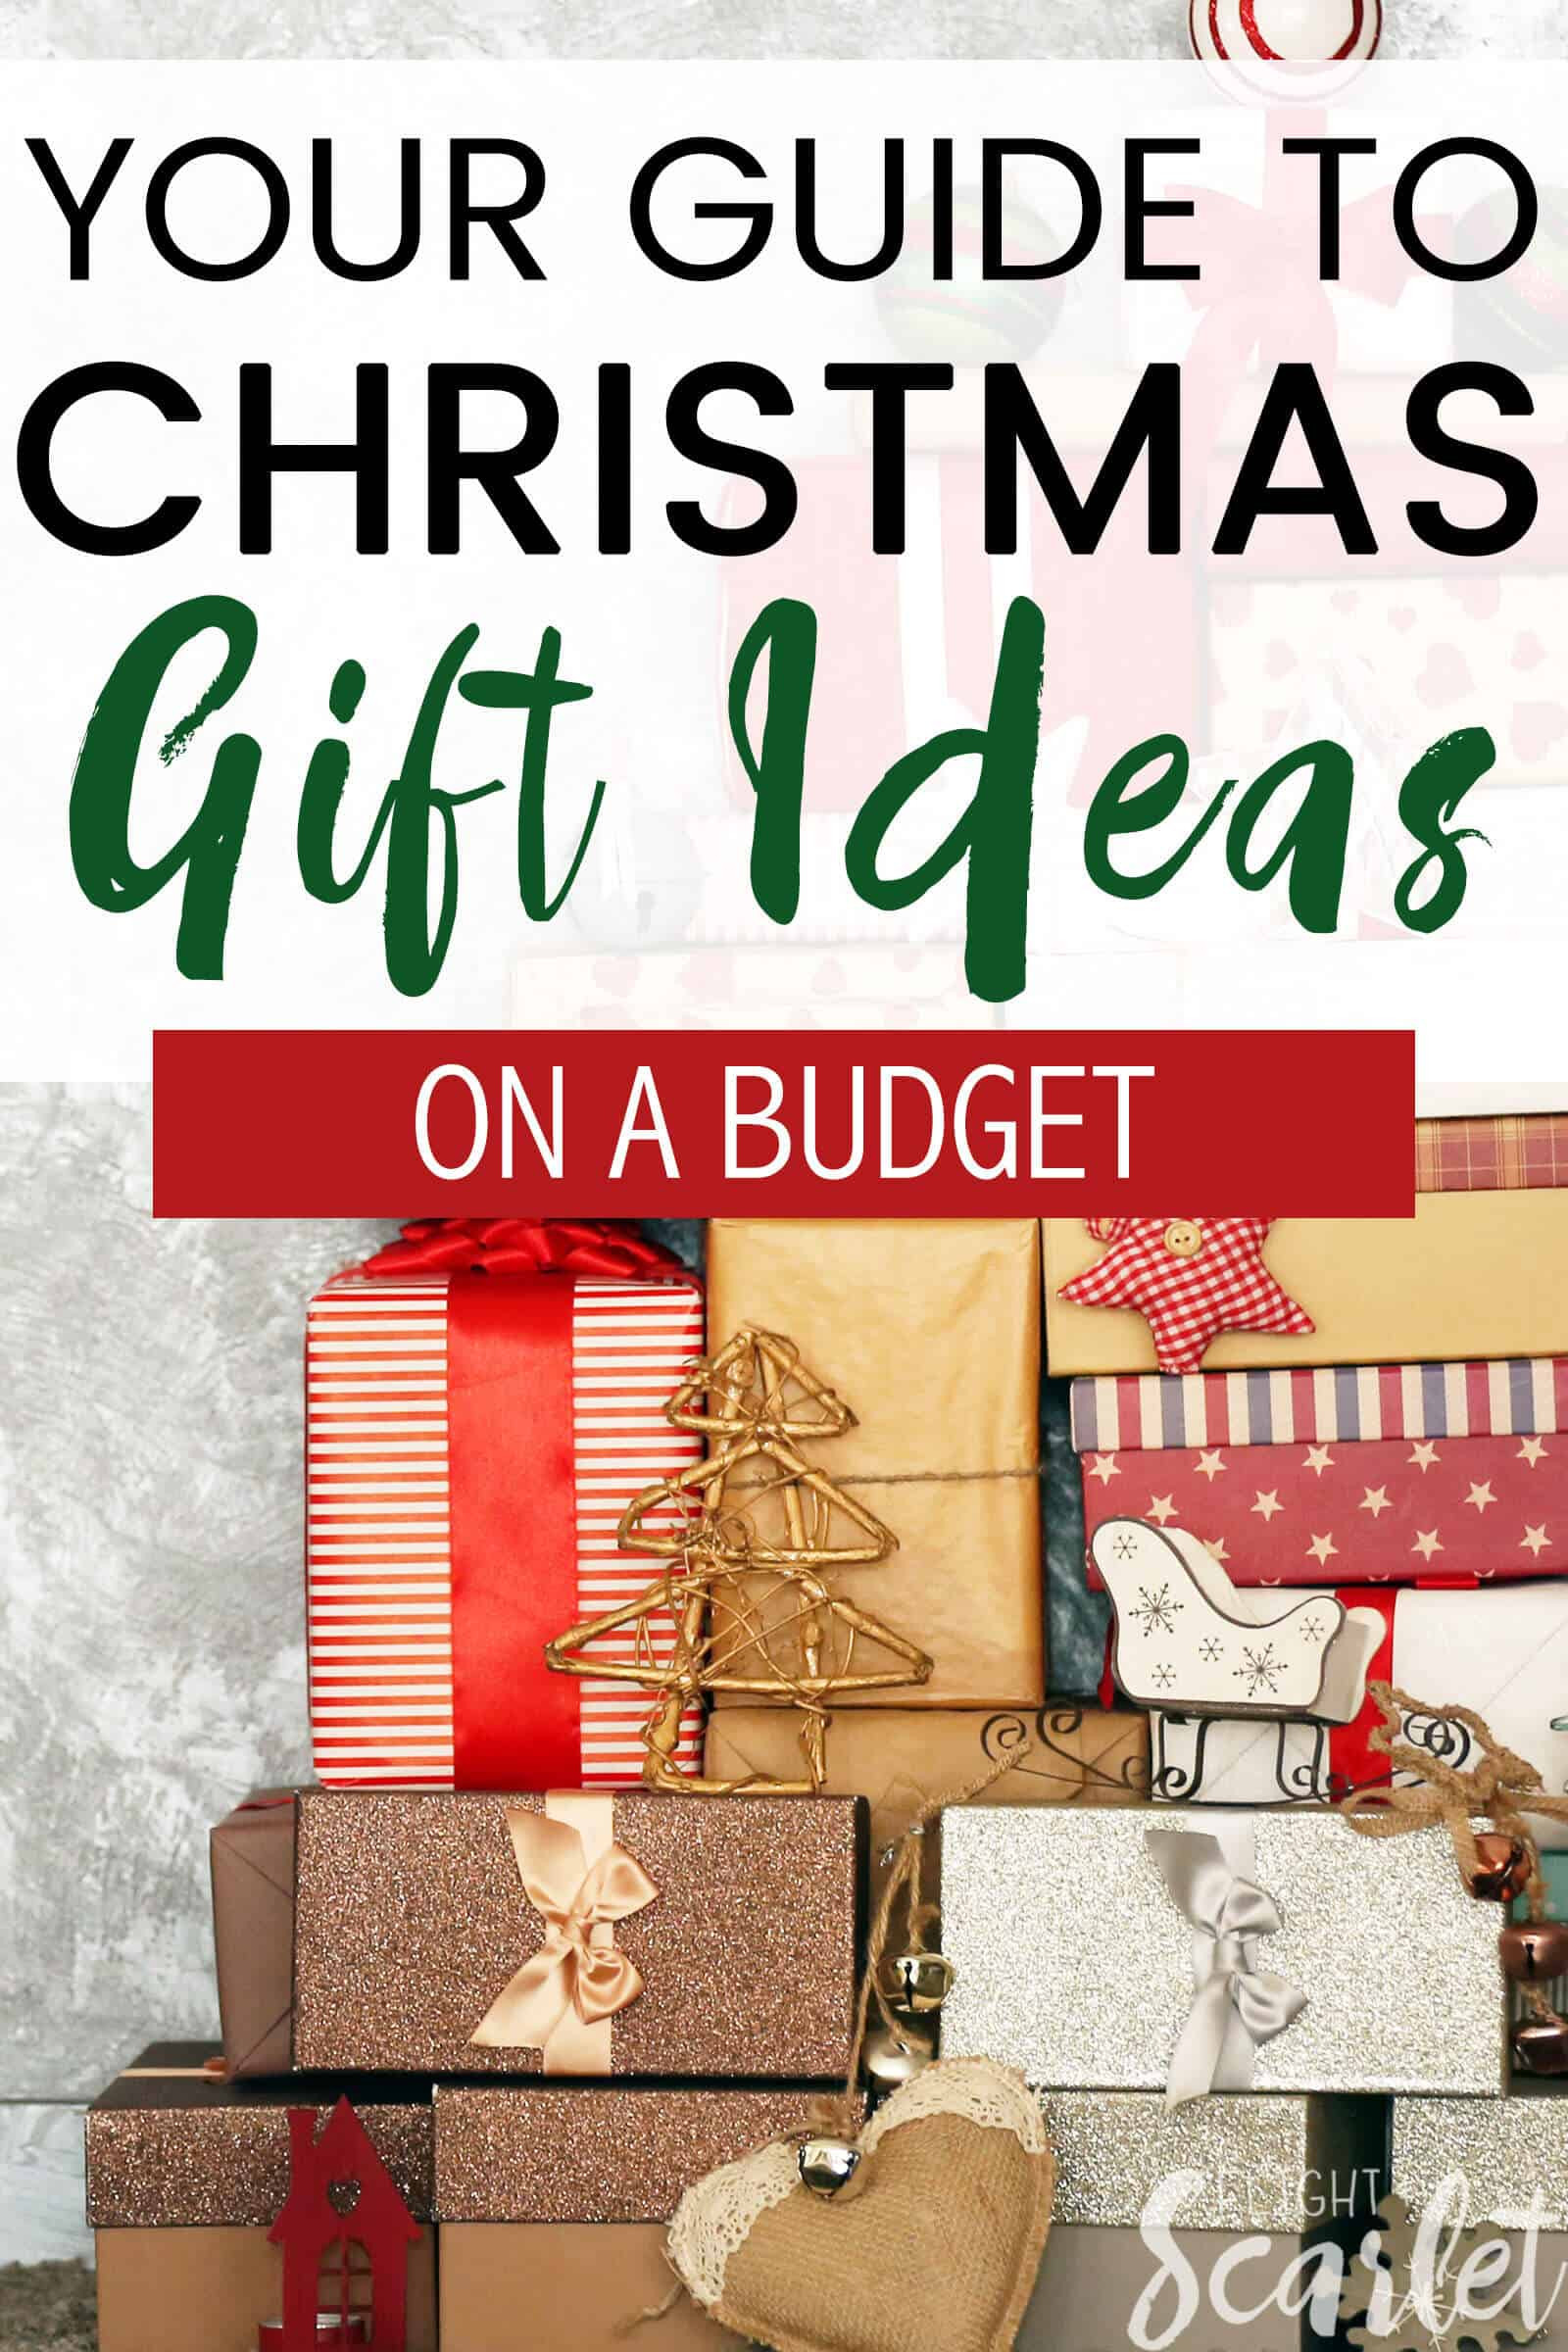 Christmas Gift Ideas On A Budget
 4 Bud Friendly Holiday Decor Ideas For Apartments